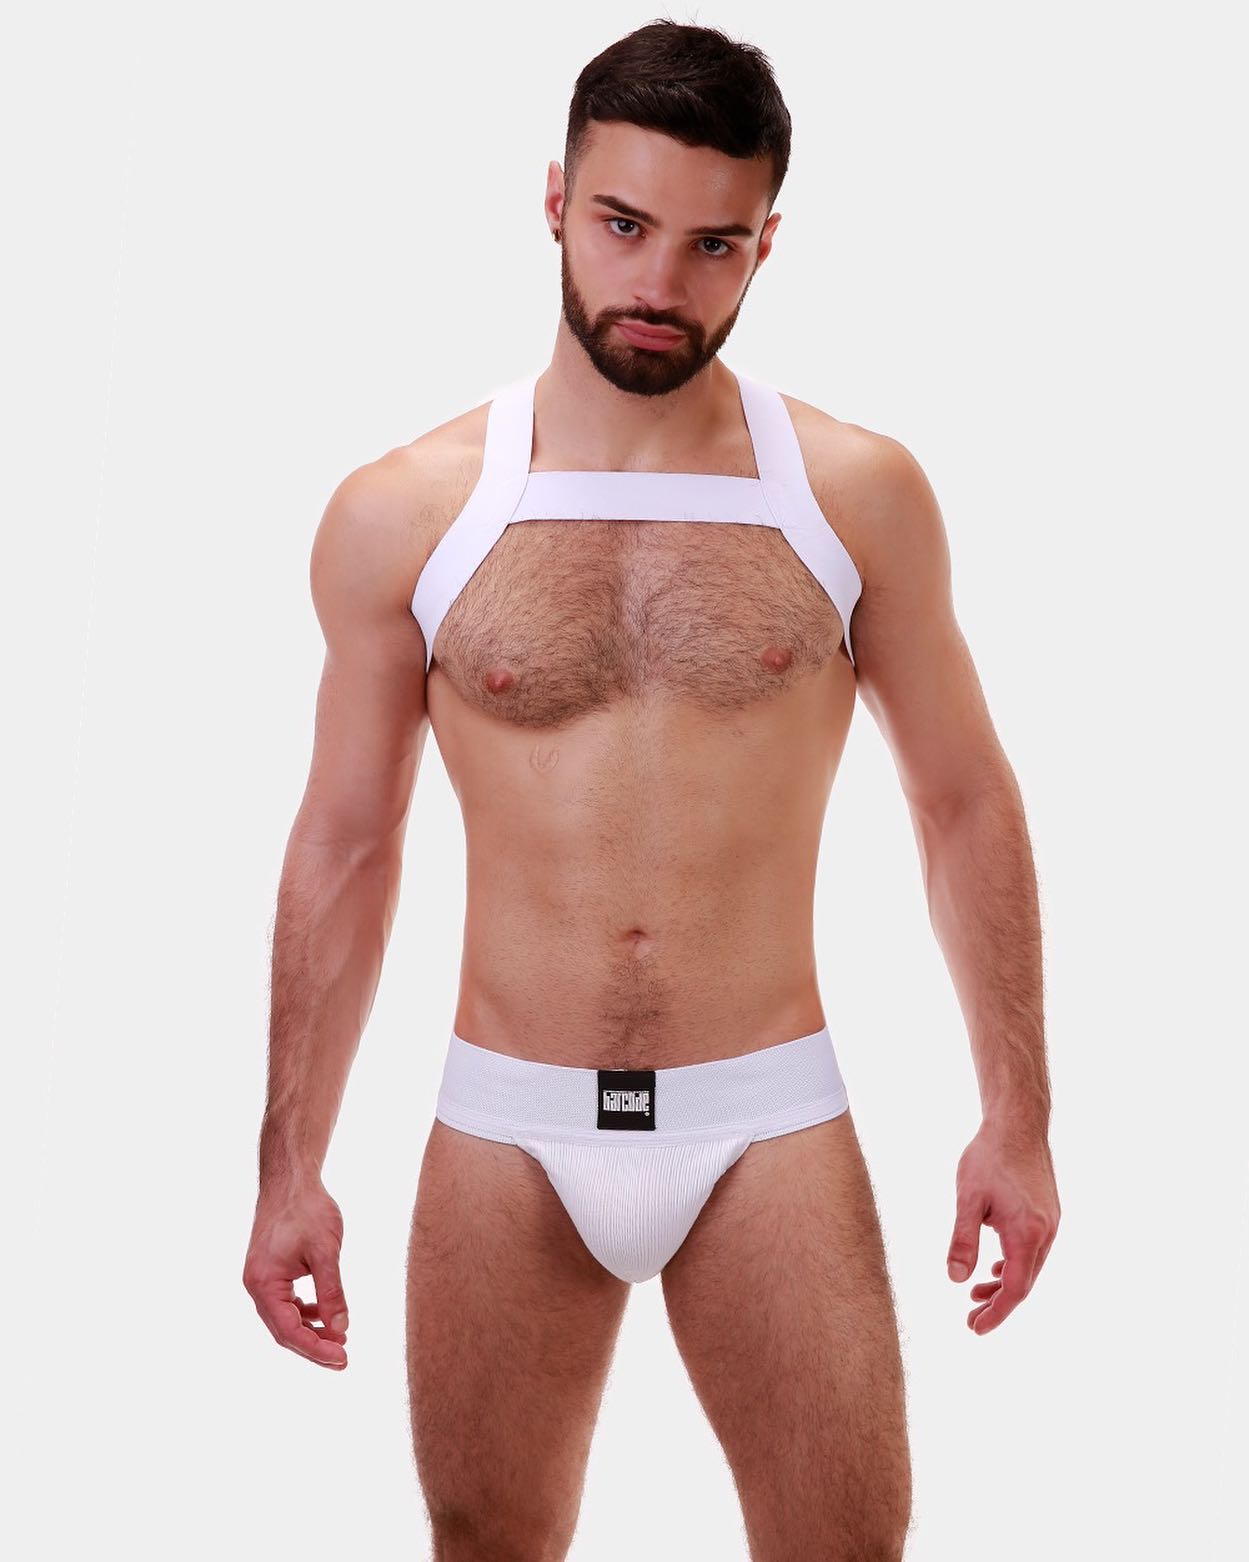 Constantly restocked, the iconic Jock Sergey is available in various colours and sizes. A robust pair of underwear made to last and be enjoyed for a long time:
____
menandunderwear.com/shop